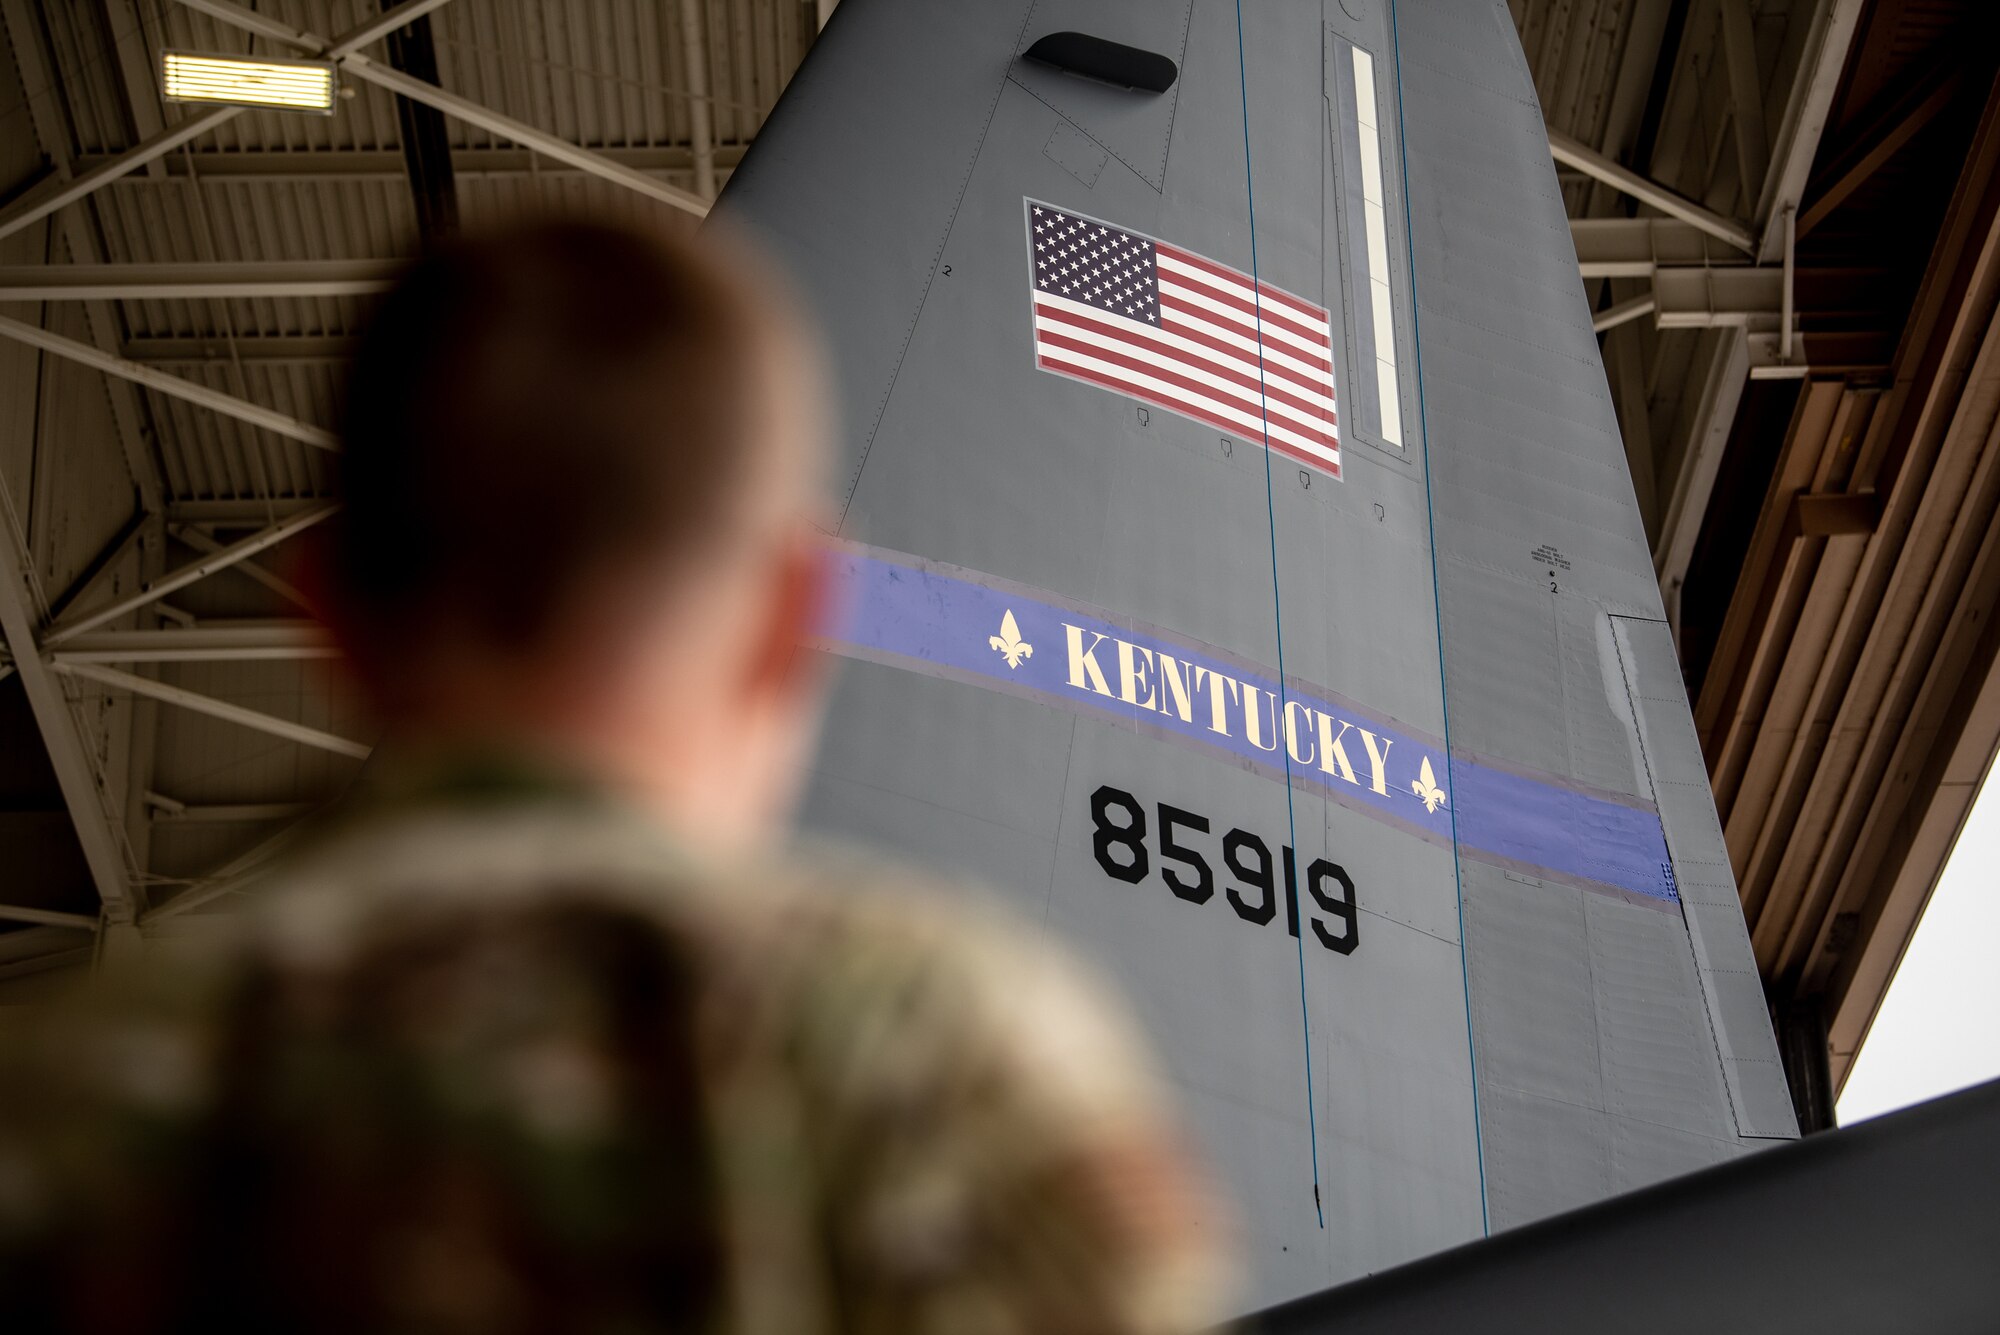 An Airman from the 123rd Maintenance Group observes freshly applied tail art of one of the Kentucky Air National Guard’s new C-130J Super Hercules aircraft at Channel Islands Air Guard Station in Port Hueneme, Calif., Nov. 3, 2021. The aircraft is replacing the C-130H Hercules, which has been in service to the Kentucky Air National Guard since 1992.